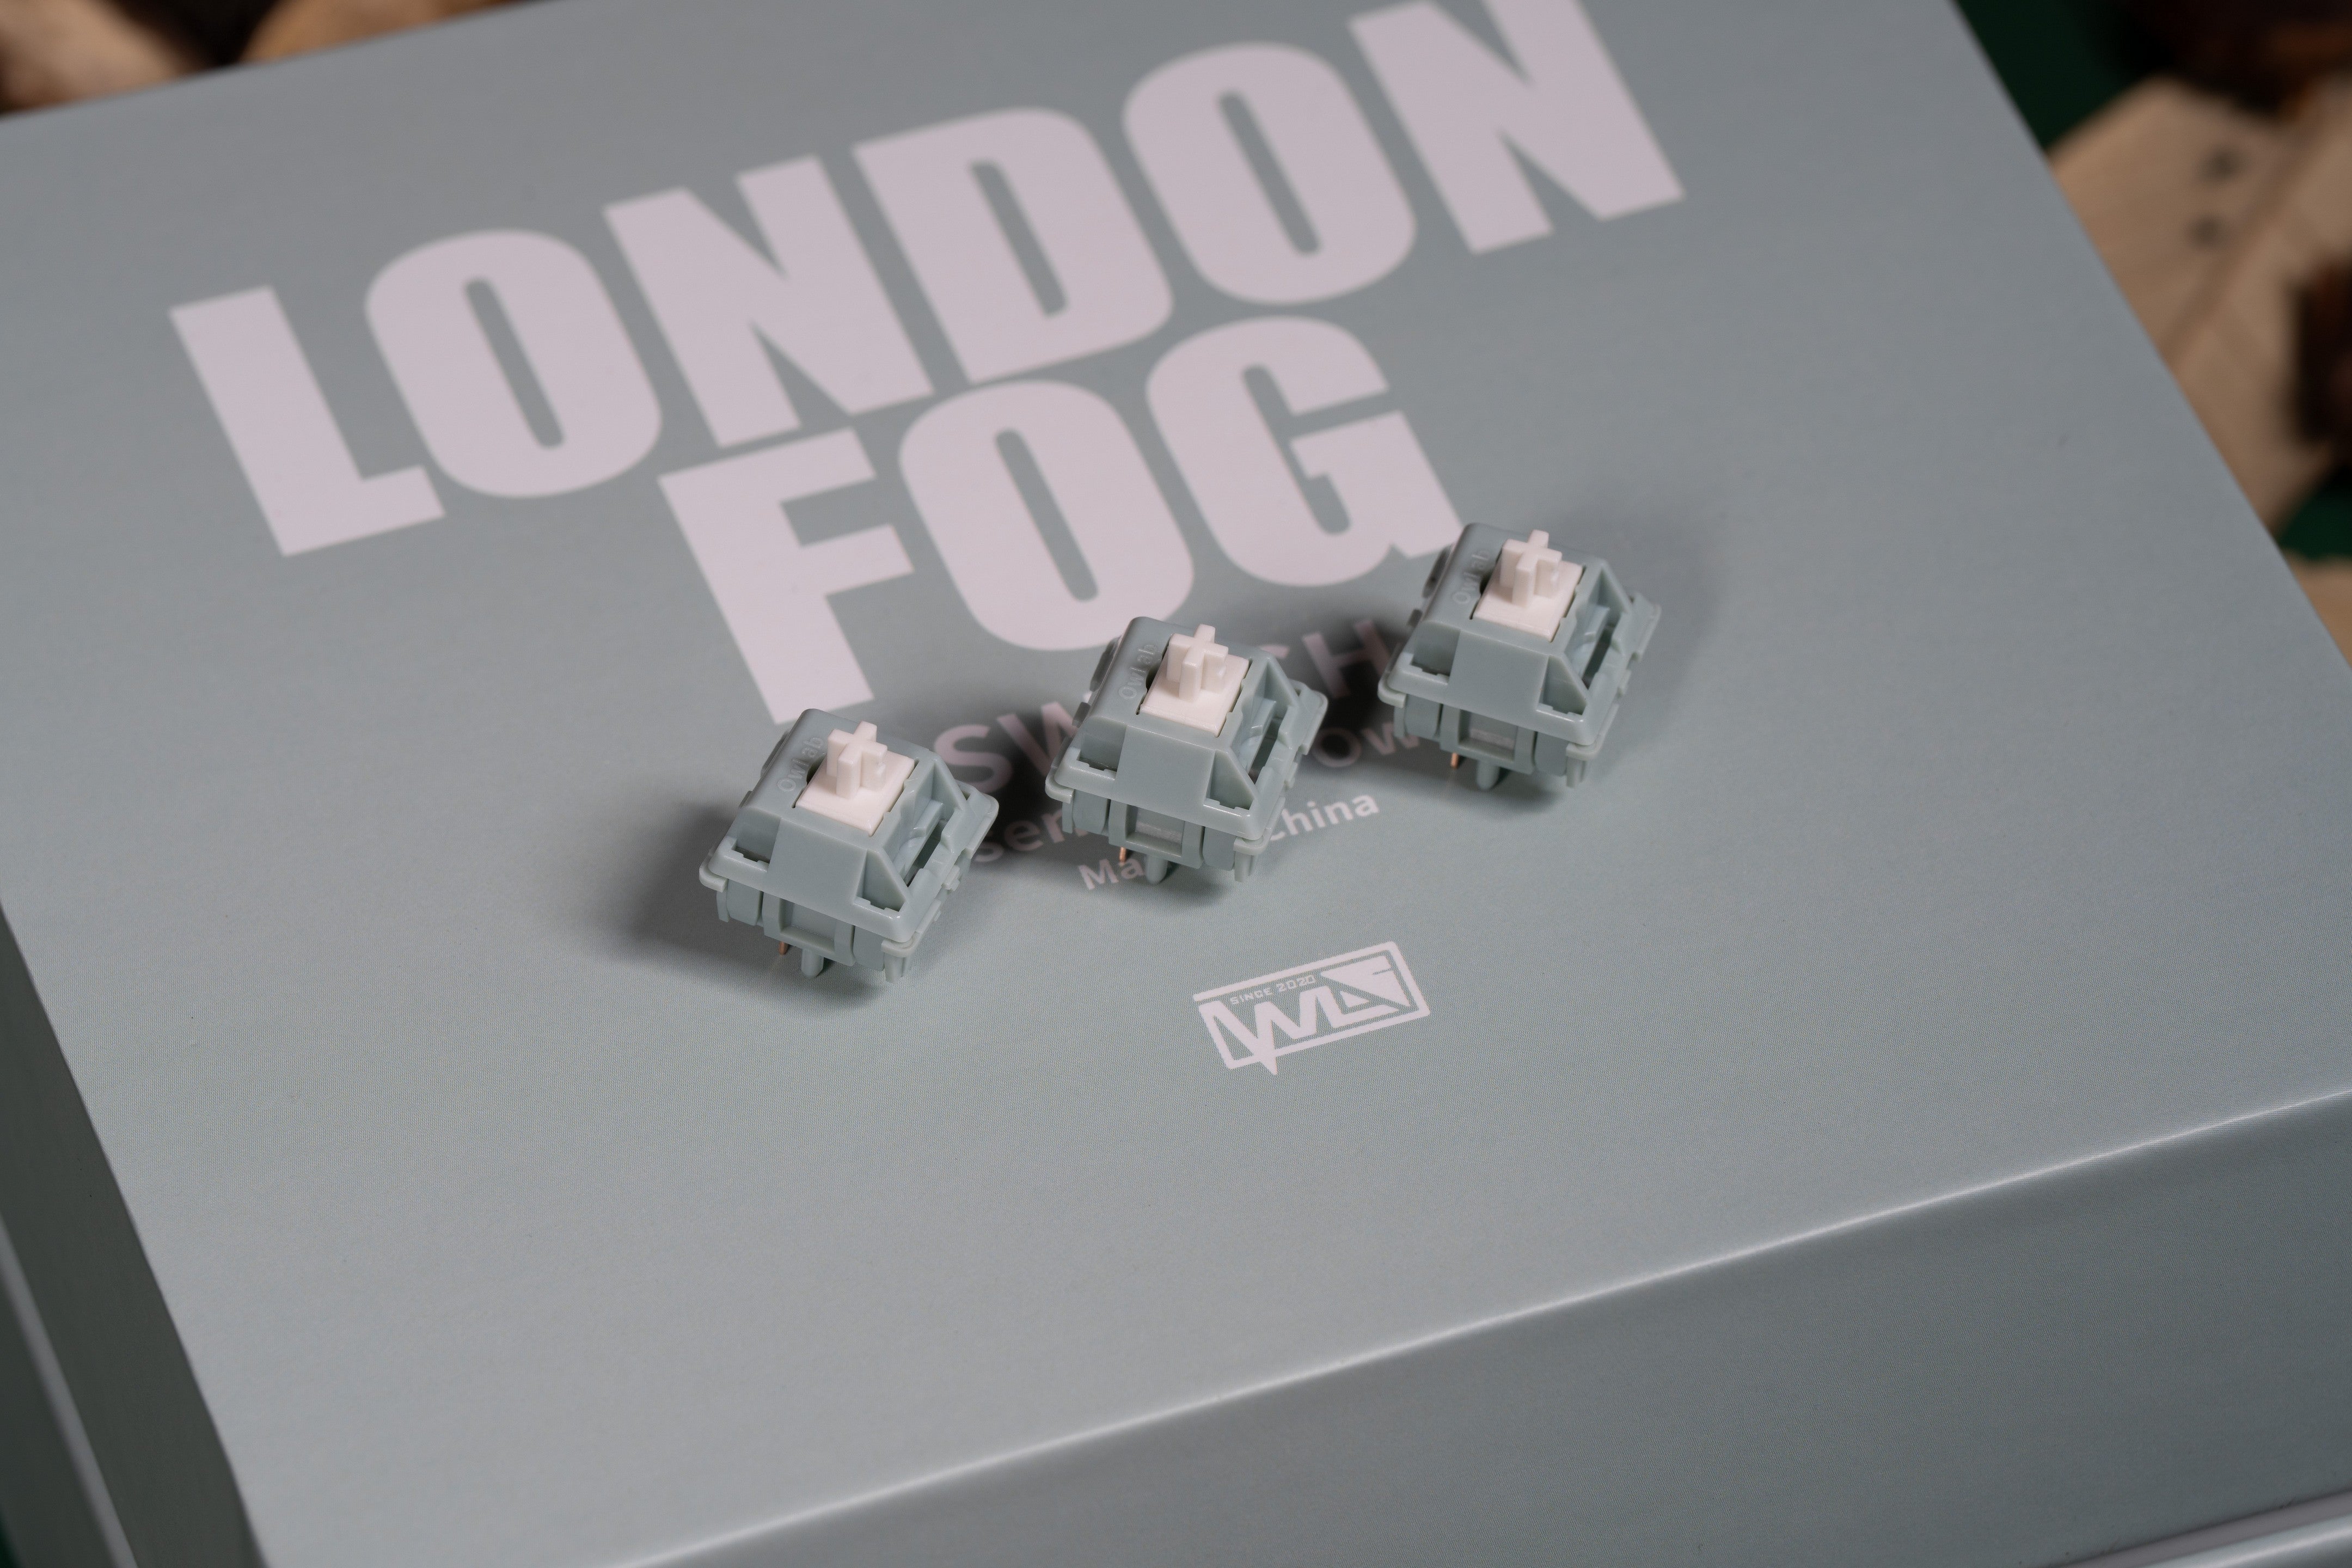 OwLab London Fog Linear Switches - KeebsForAll